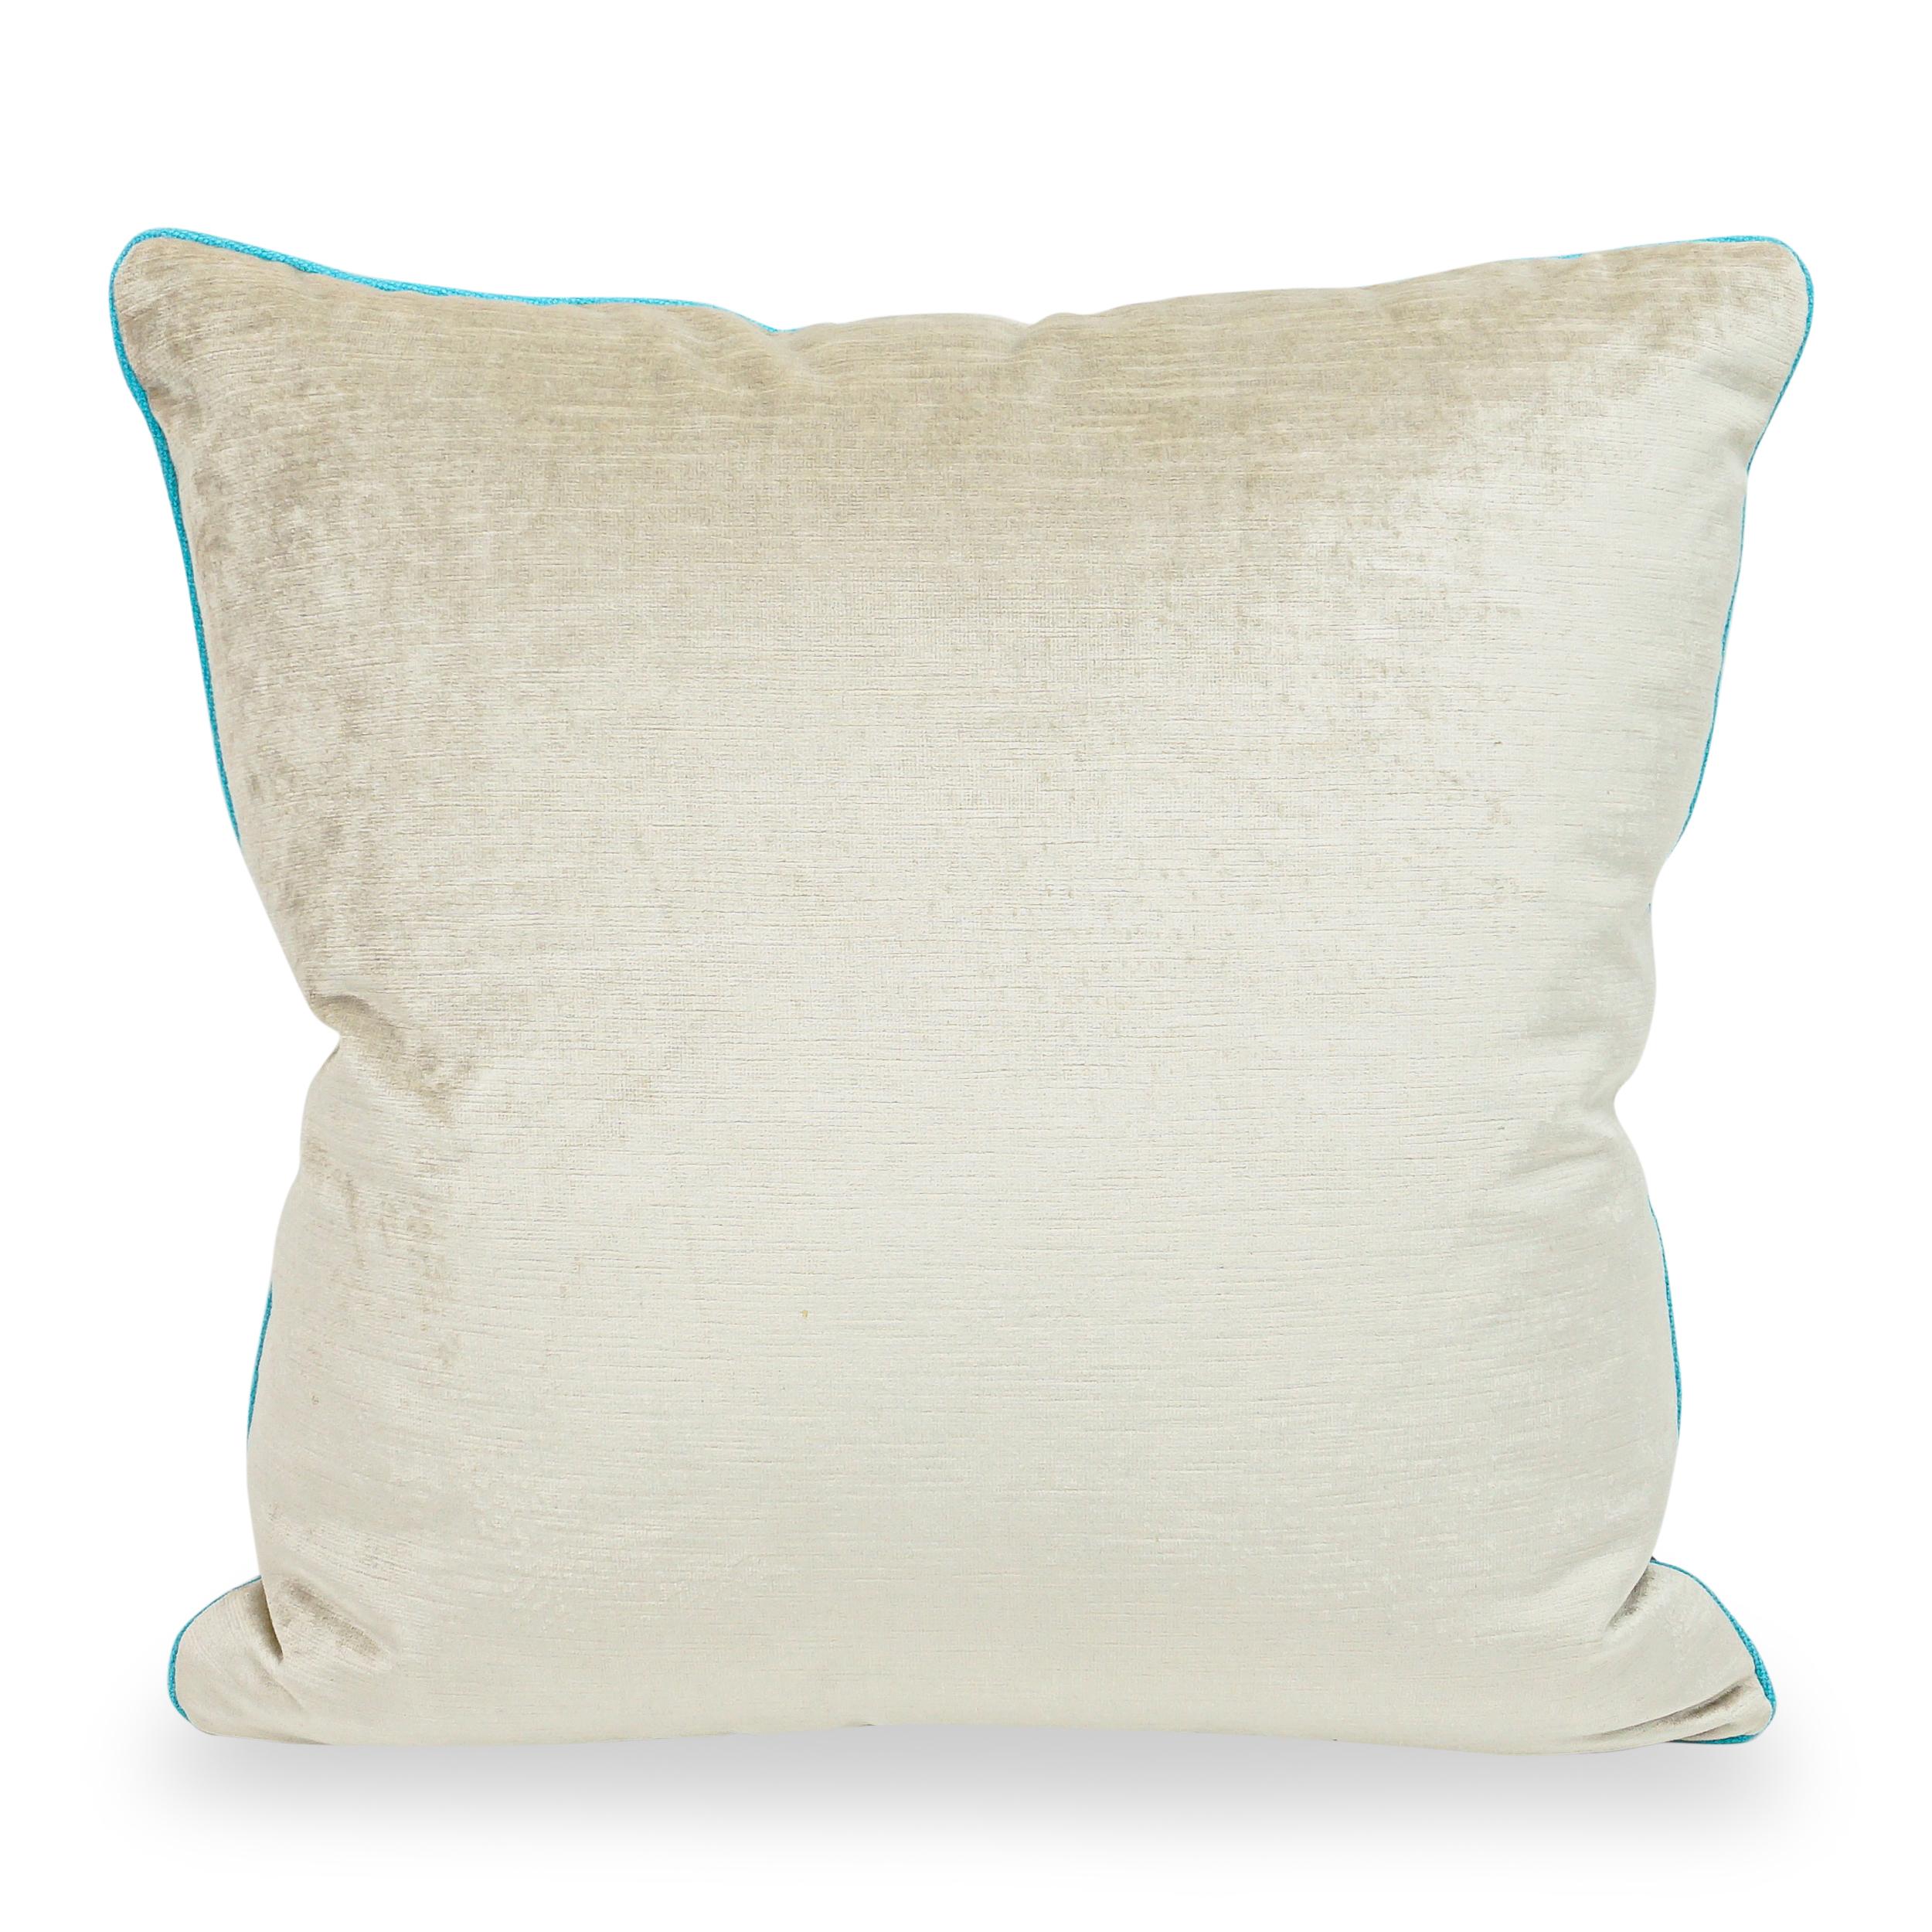 Modern Throw Pillows with Colorful Satin Stripes For Sale